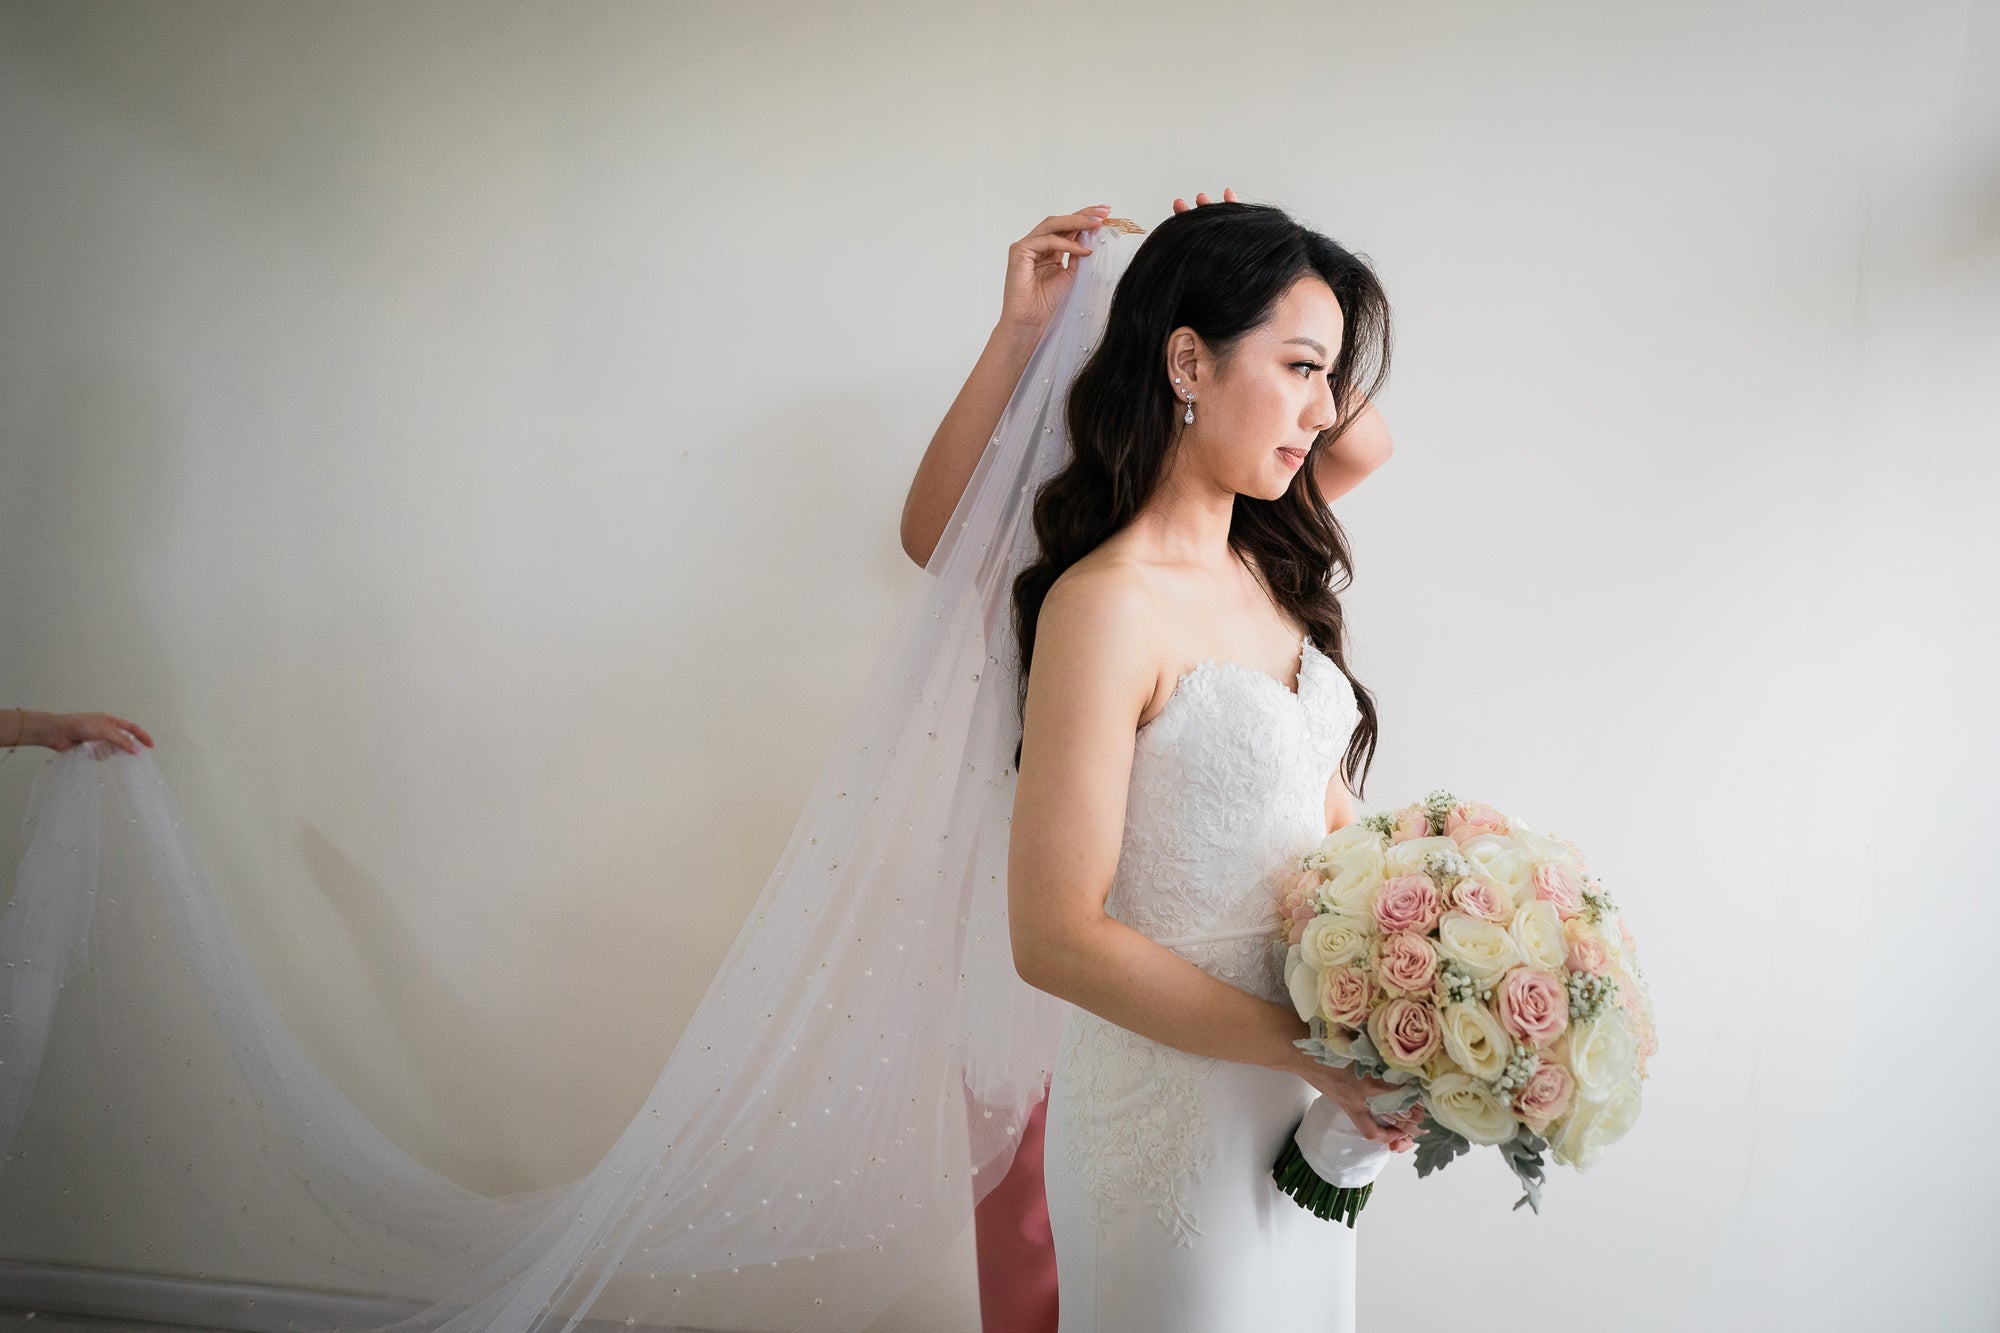 Bride wearing the christella pearl wedding veil while holding the bouquet